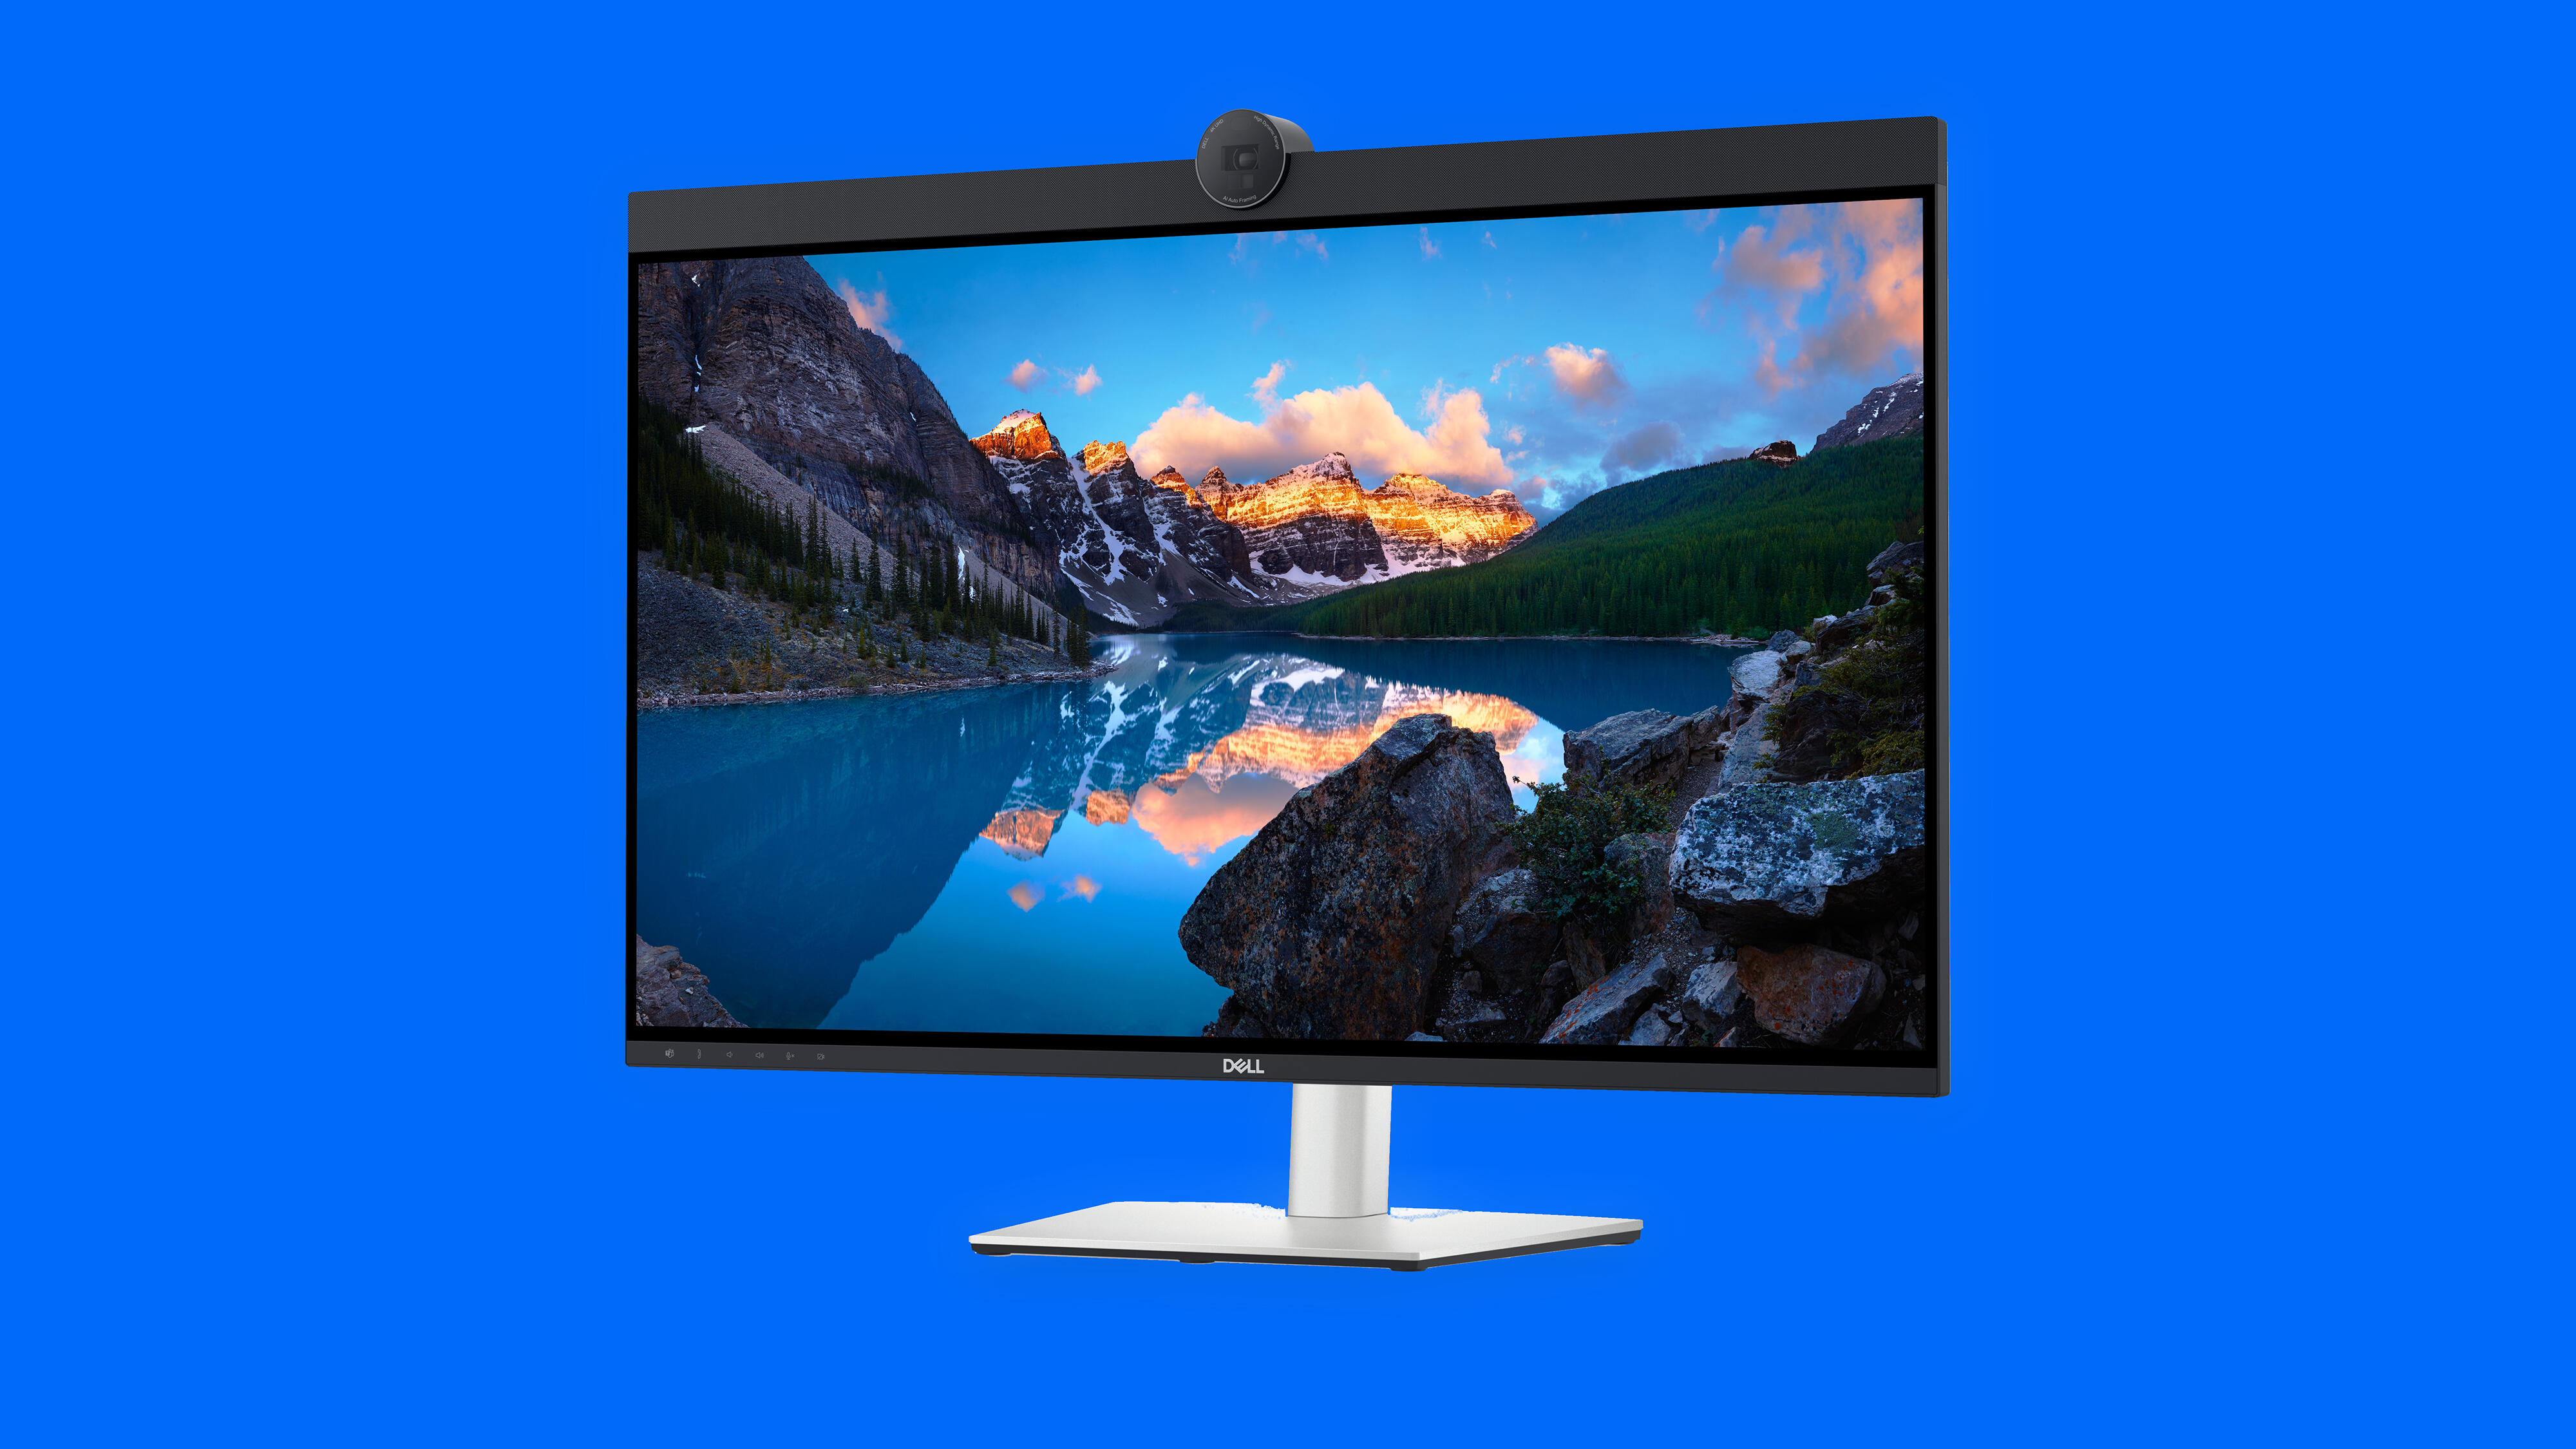 Dell UltraSharp U3223QZ Monitor Review: Great Screen, Feature-Packed - CNET